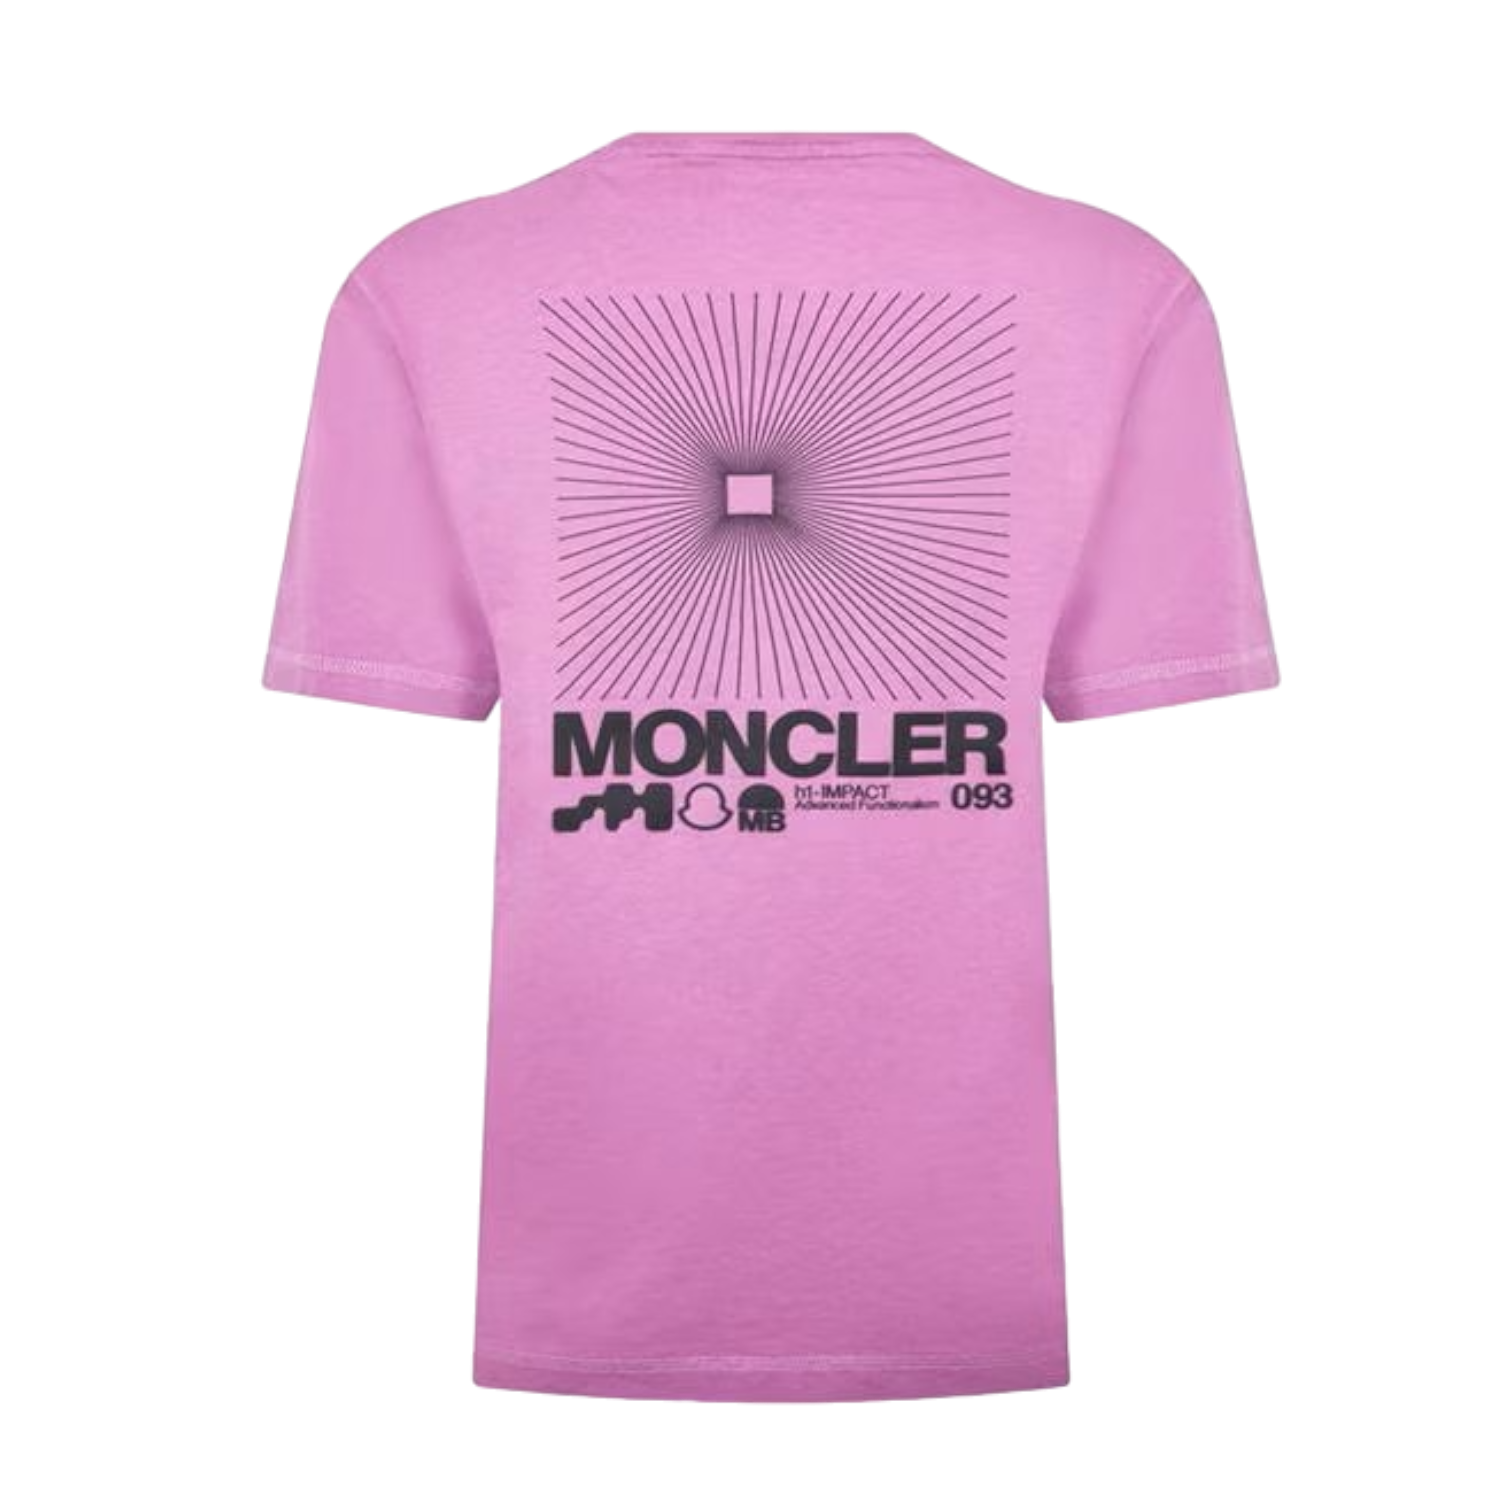 LUXURY HUB MONCLER LOGO AND GRAPHIC TOP